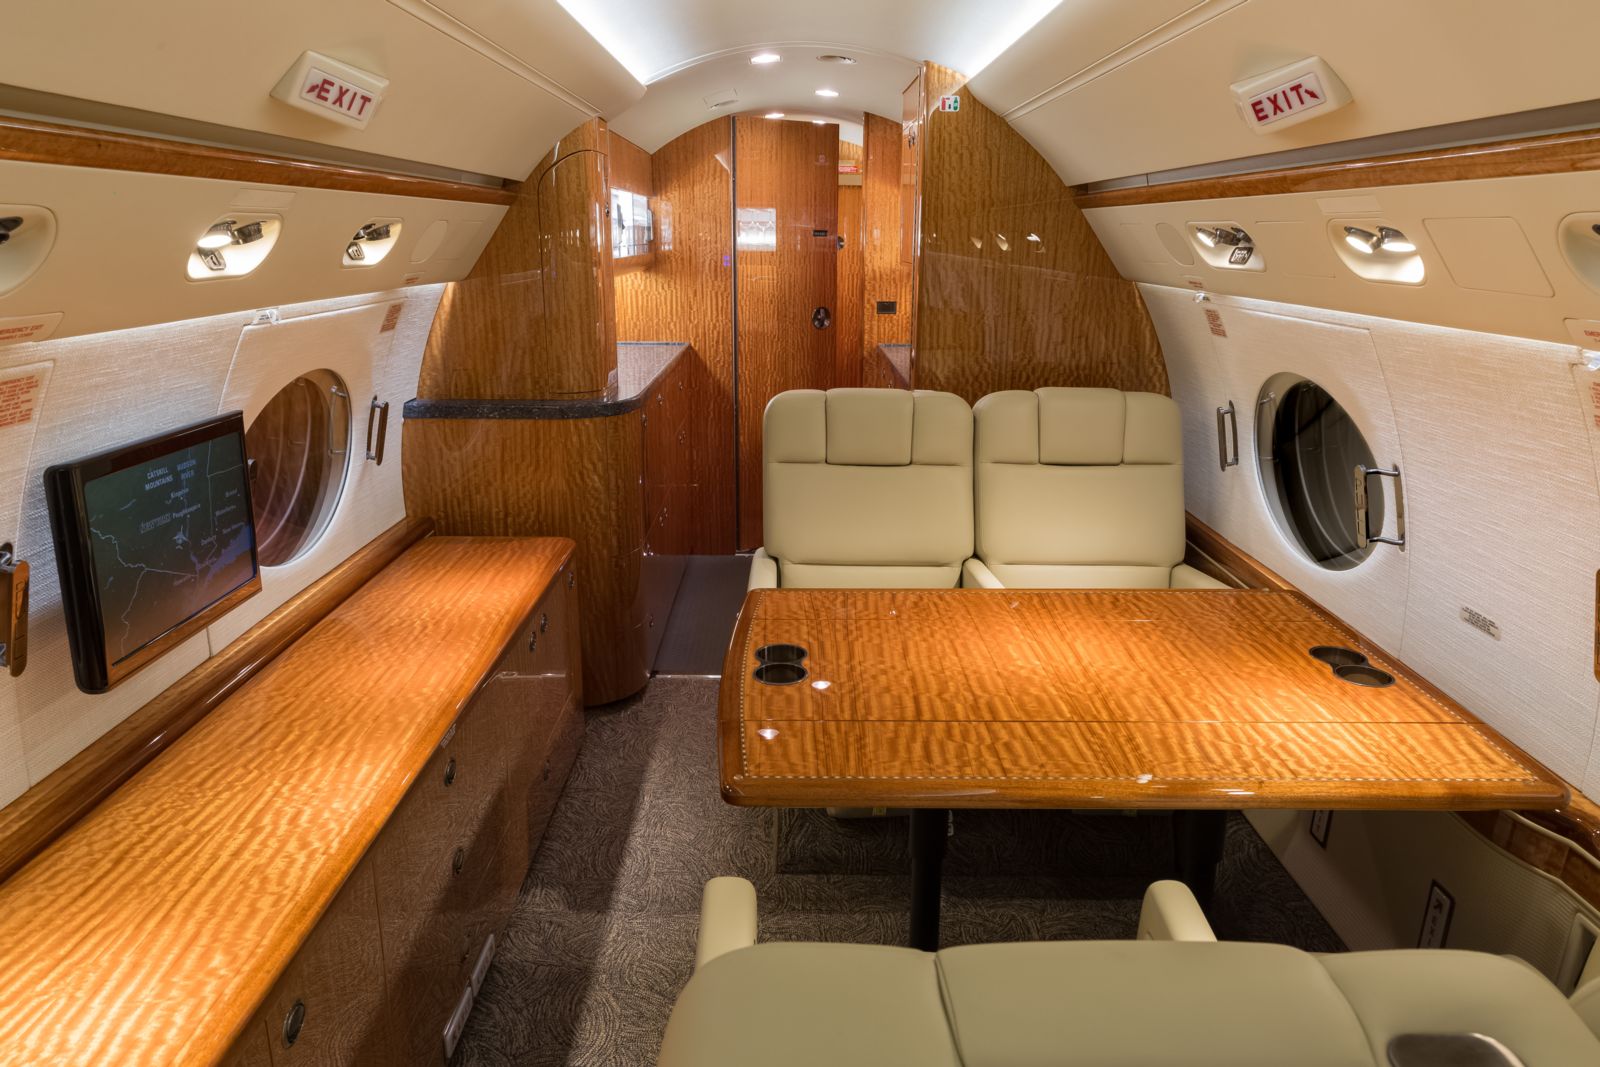 Gulfstream G550  S/N 5390 for sale | gallery image: /userfiles/images/aircraft-listing/Gulfstream_G550_sn5390/bfp_8084.jpg